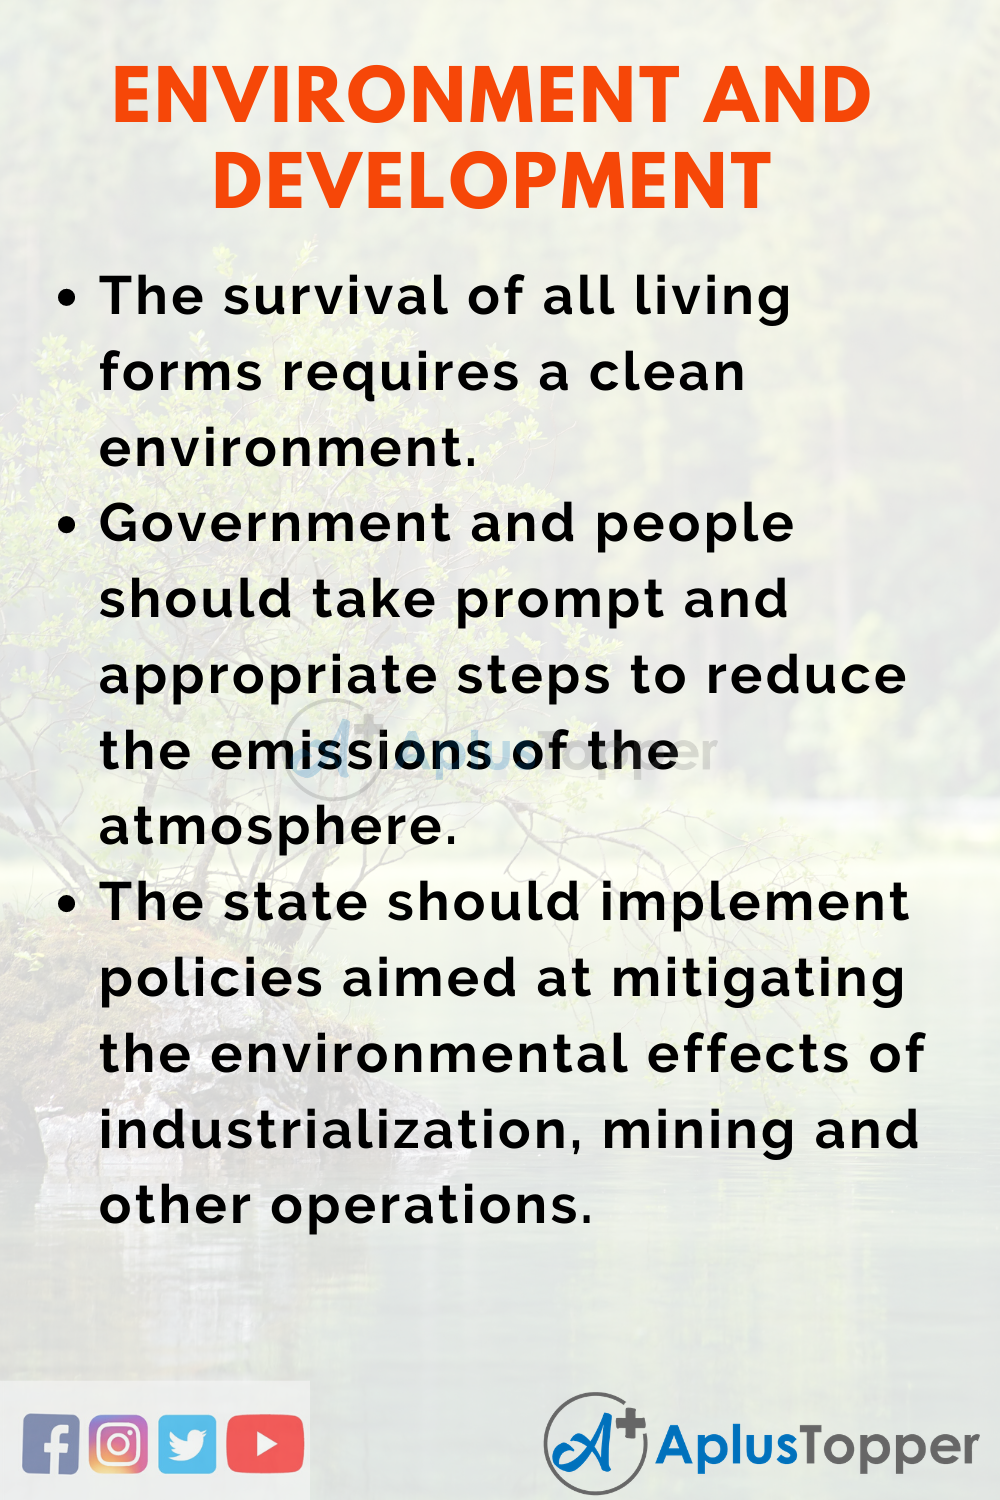 Essay about Environment and Development